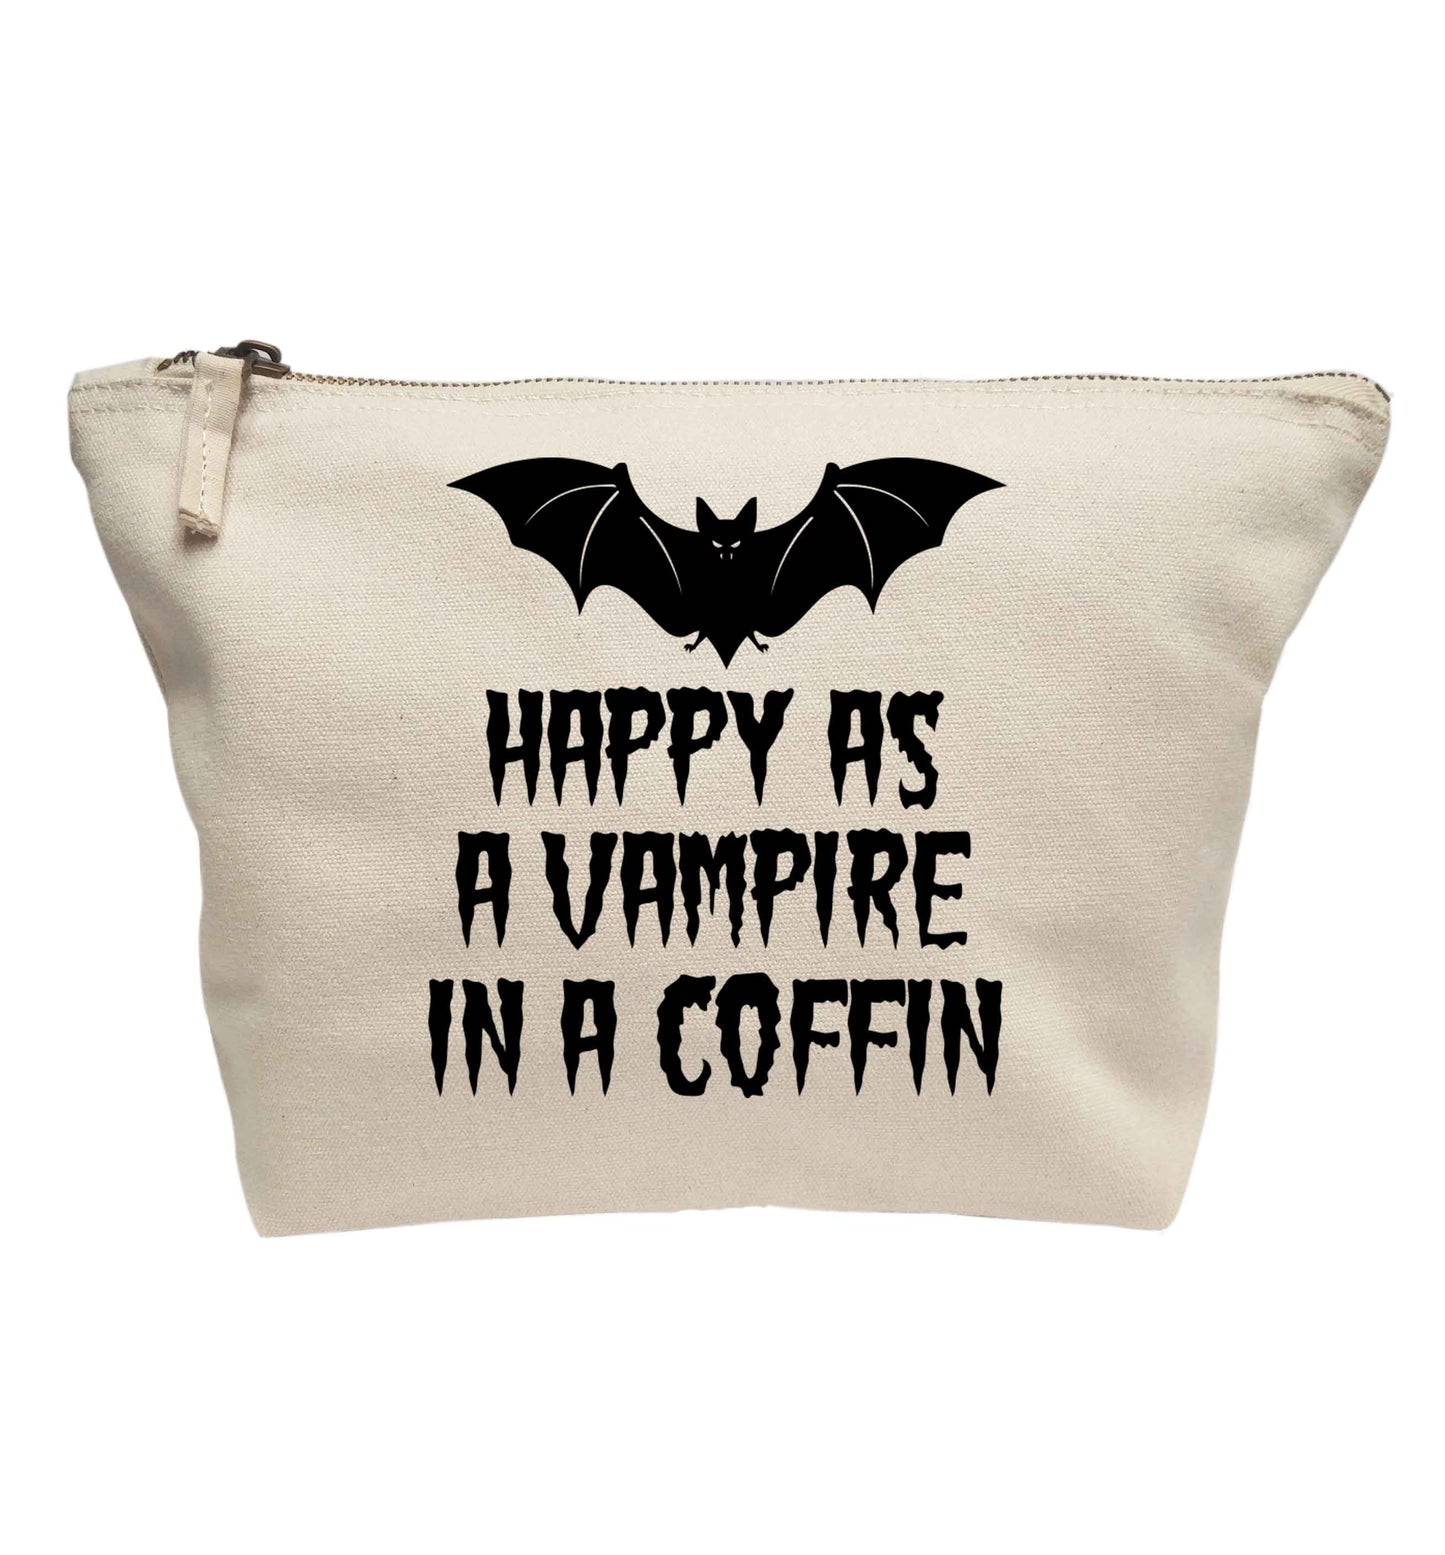 Happy as a vampire in a coffin | makeup / wash bag